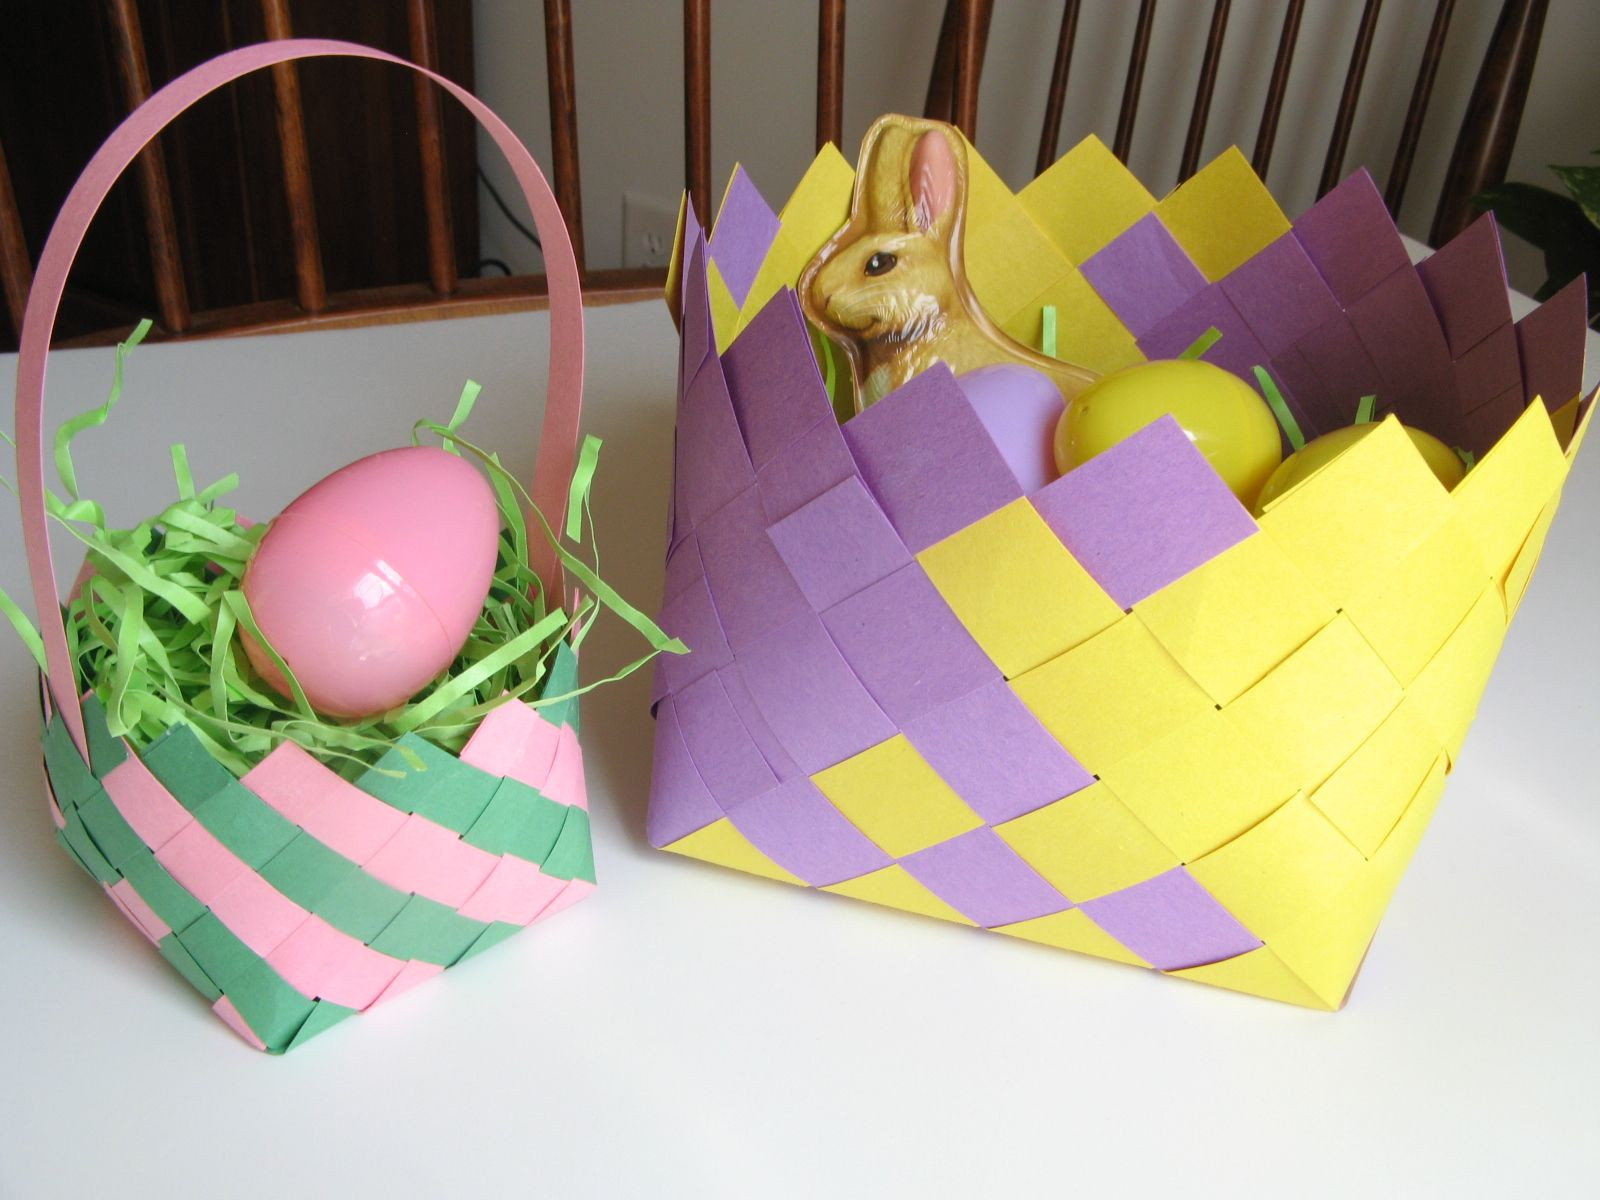 Construction Paper Easter Crafts
 An Easy Illustrated Guide to Creating Woven Construction